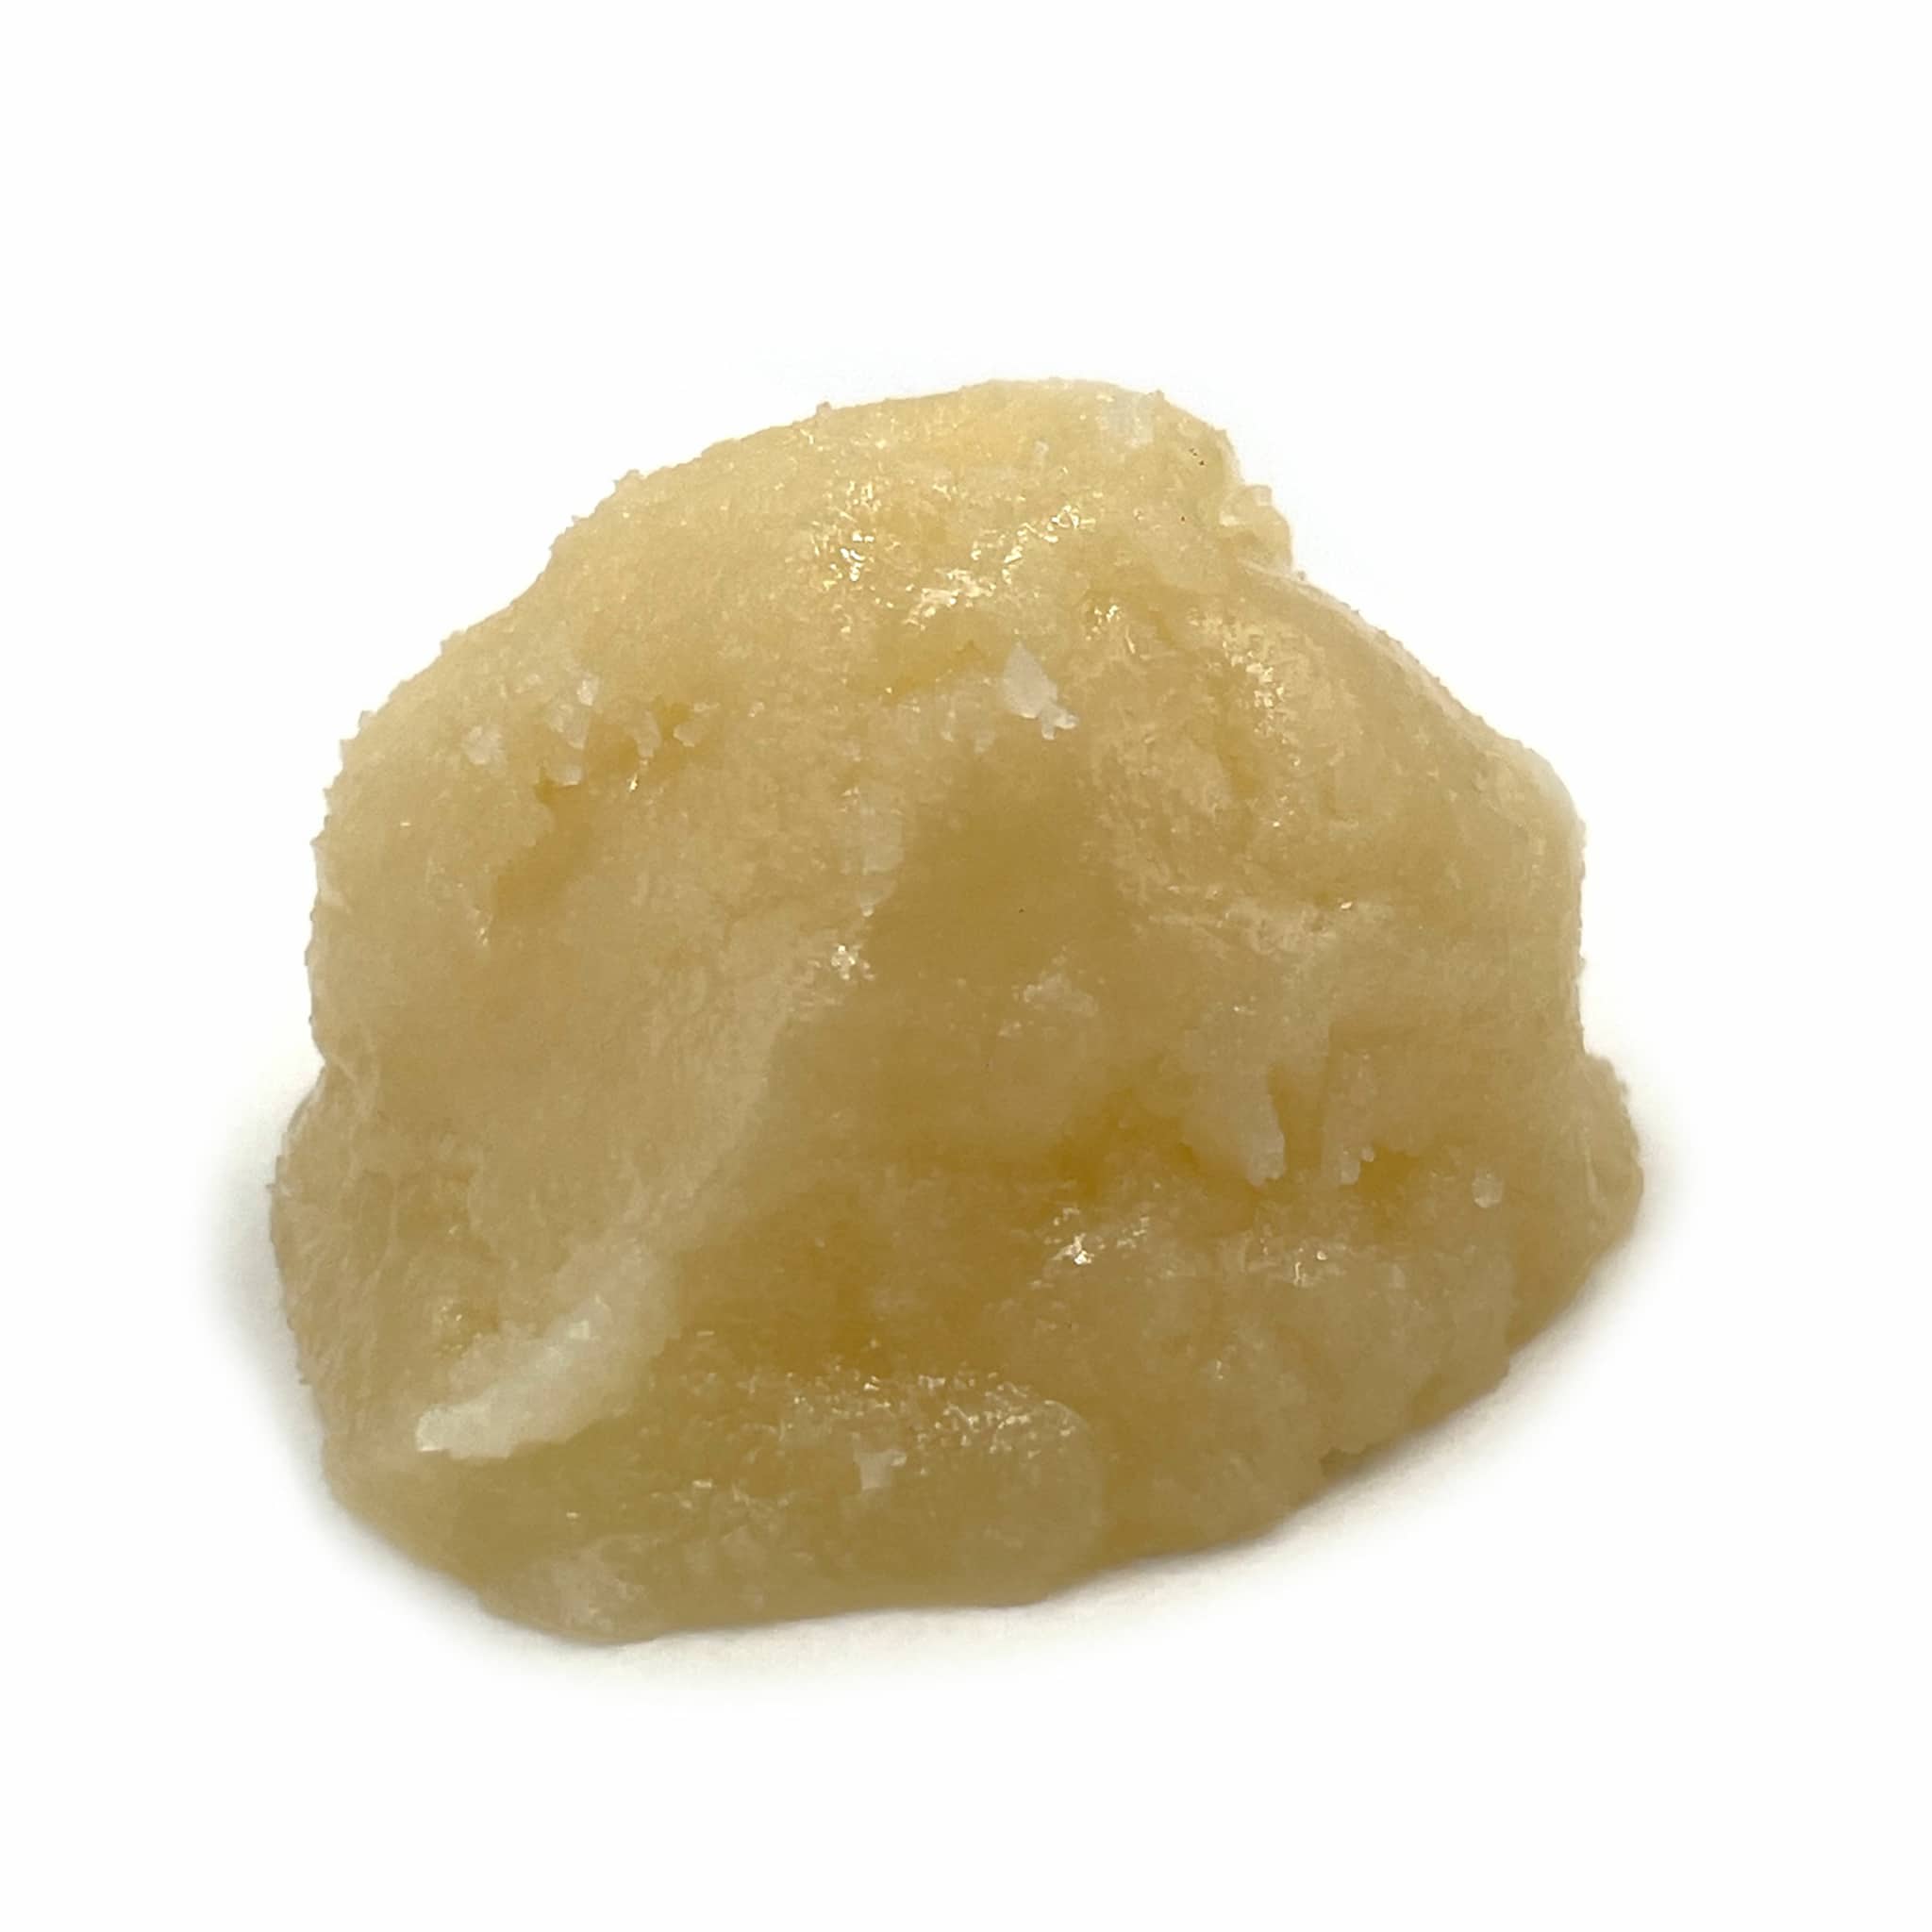 Live Resin - Colombian Gold - Buy Online In Canada - Pacific Grass